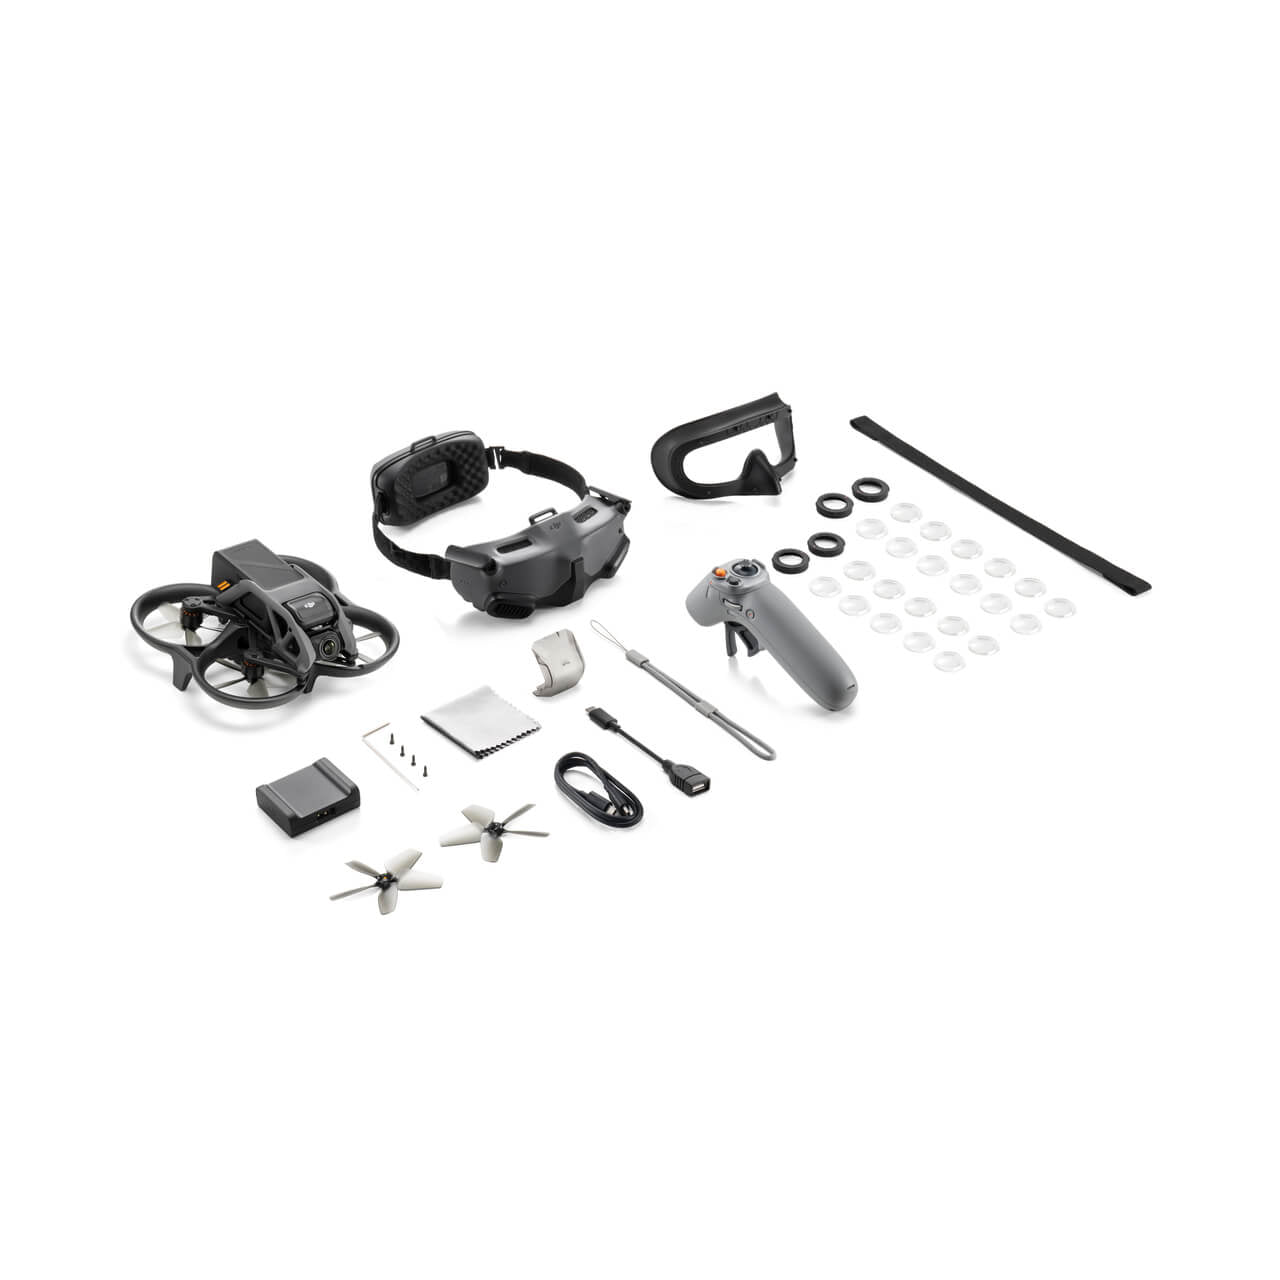 DJI Avata Explorer Combo - Premium Drones from DJI - Just $1129! Shop now at Eagleview Drones